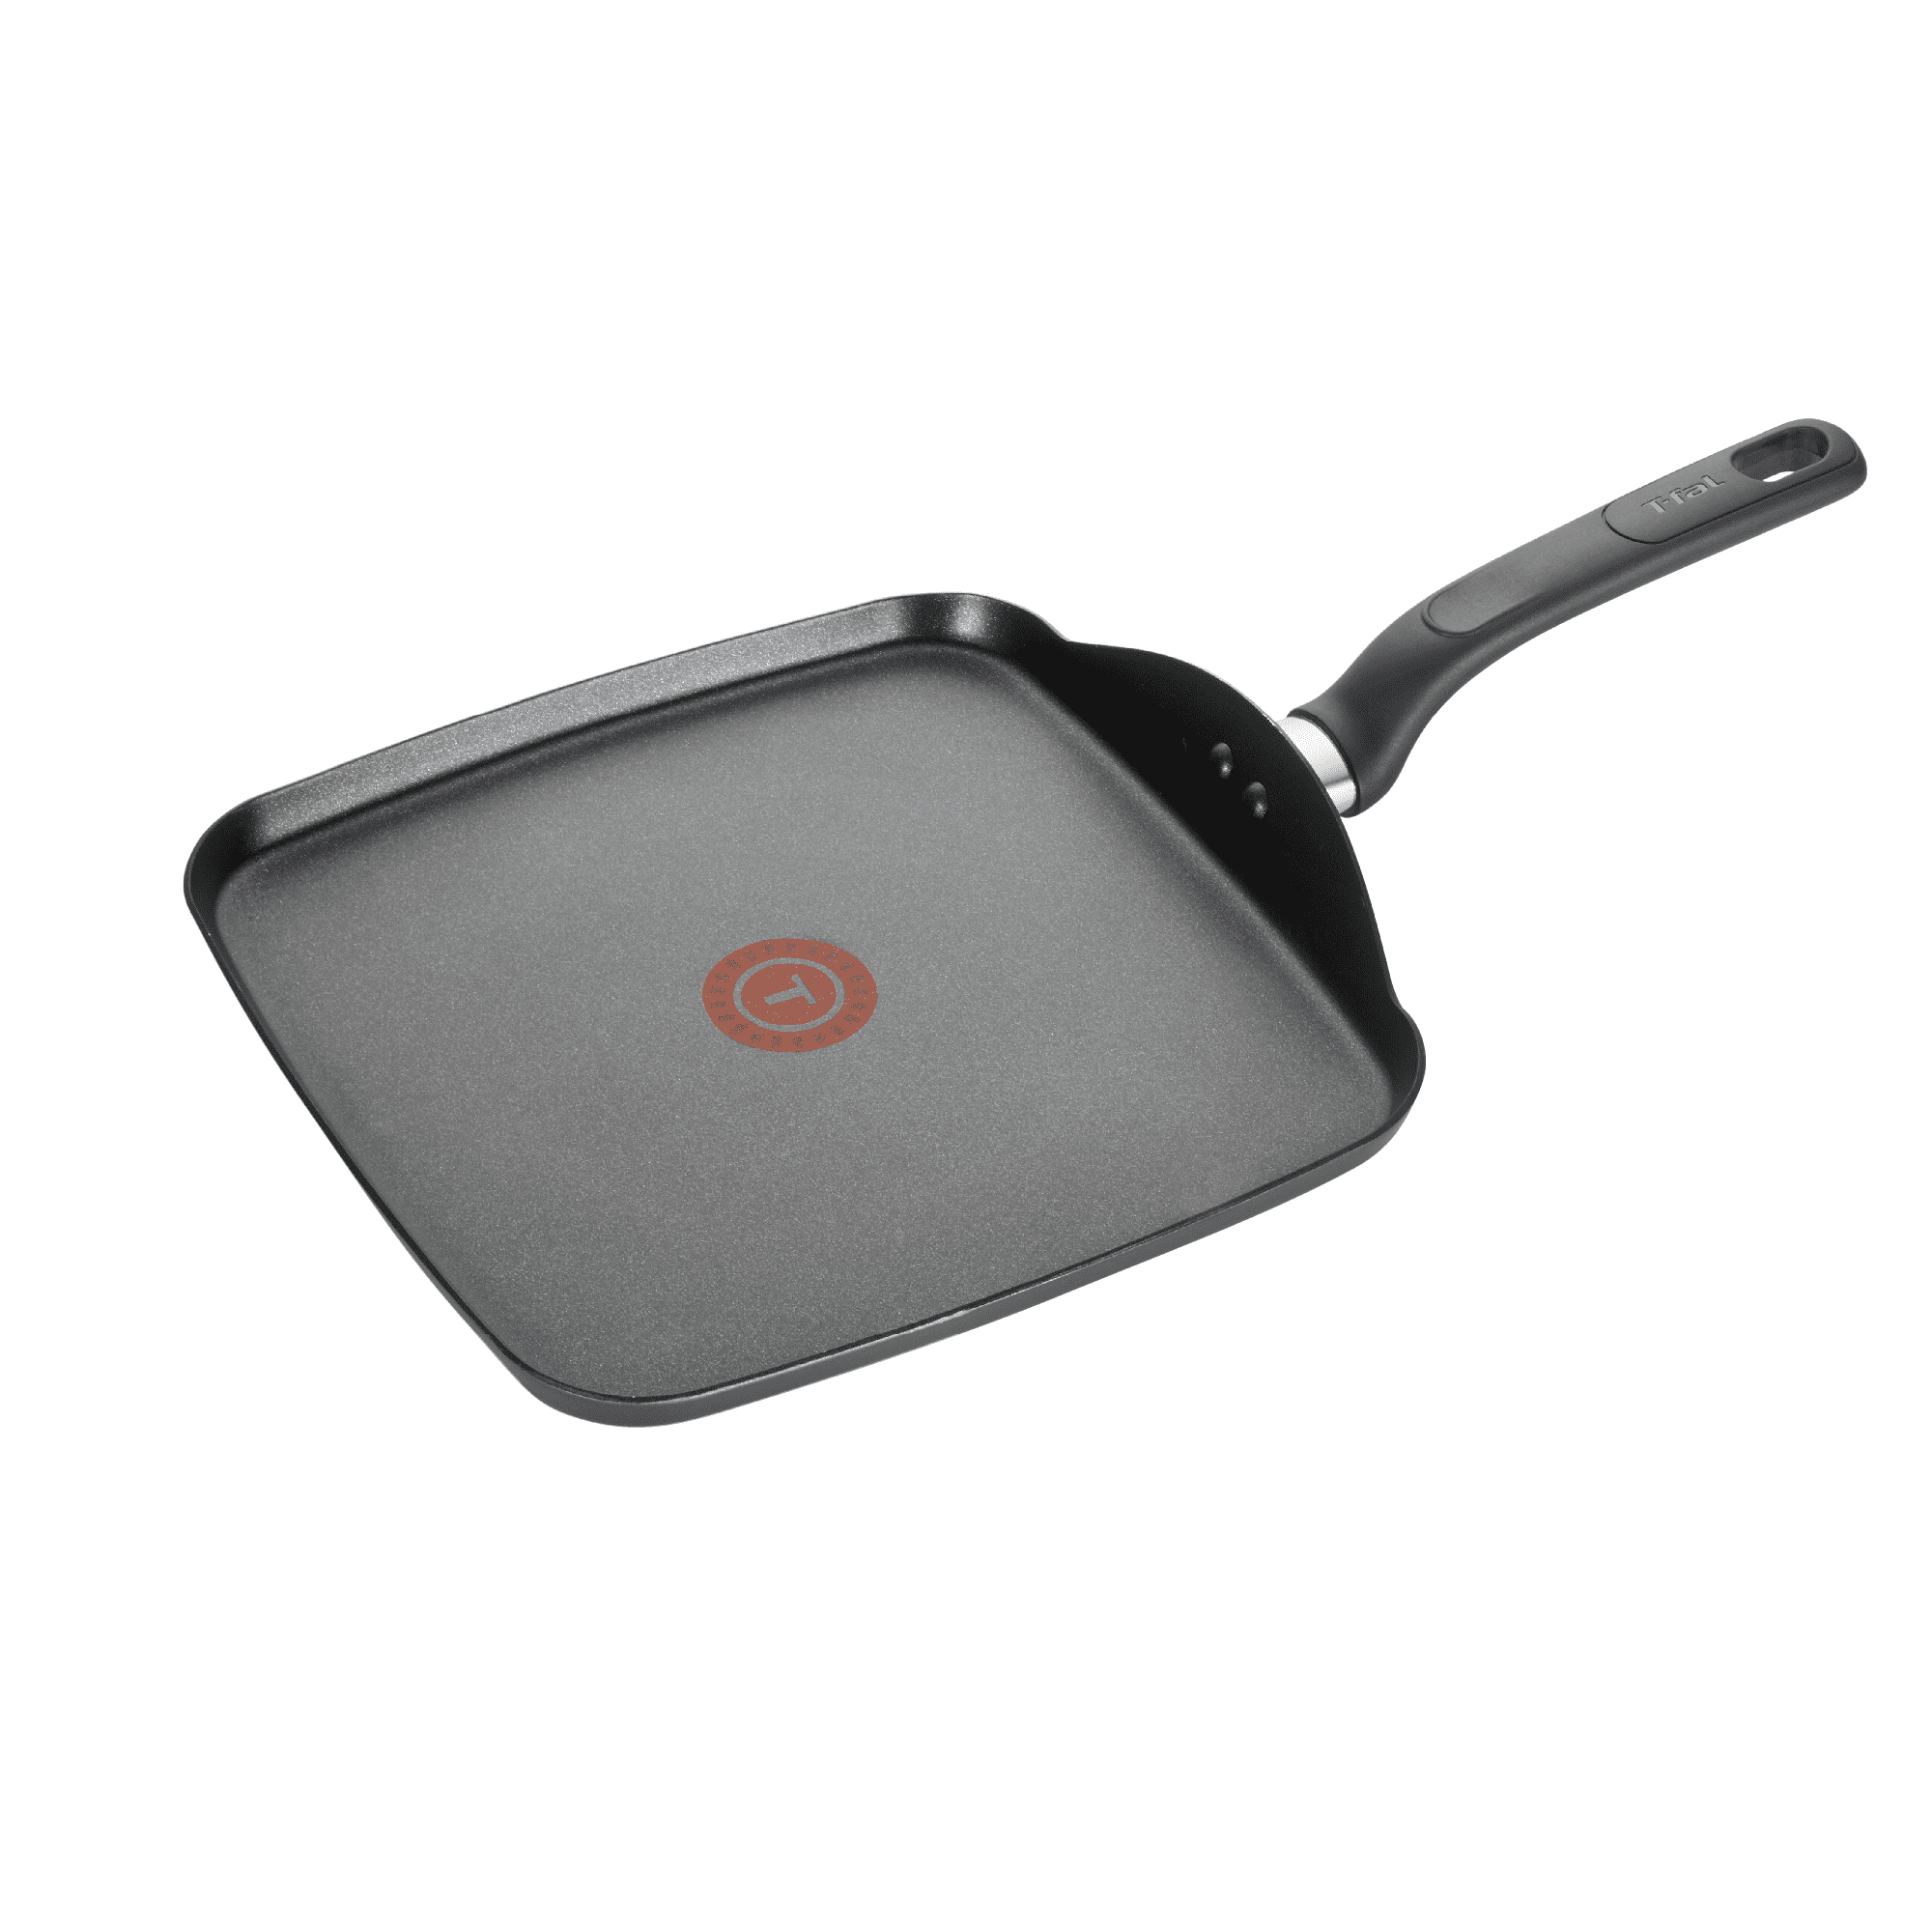 Goodful Aluminum Non-Stick Square Griddle Pan/Flat Grill, Made Without  PFOA, with Nylon Pancake Turner, Dishwasher Safe Cookware, 11 x 11,  Charcoal